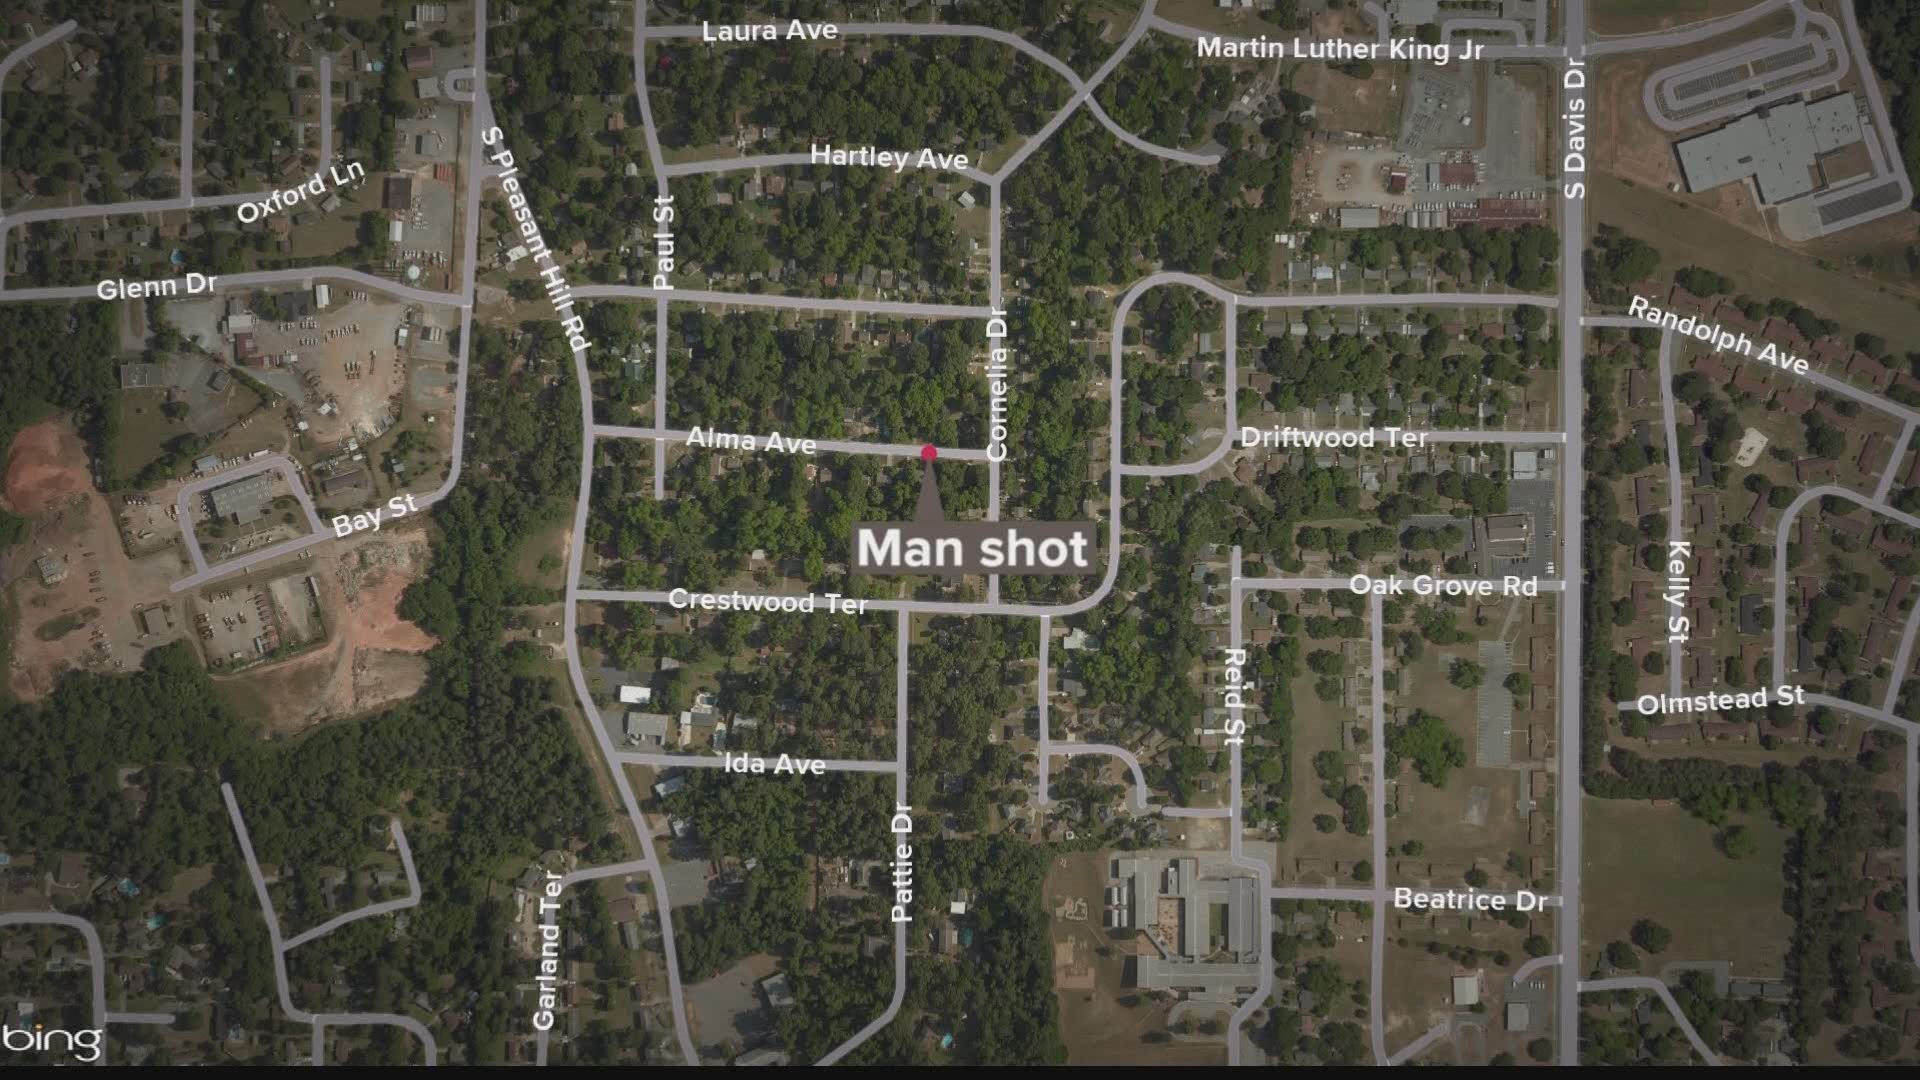 The victim was shot in the chest in a shootout with another person on the 1300 block of Alma Avenue.